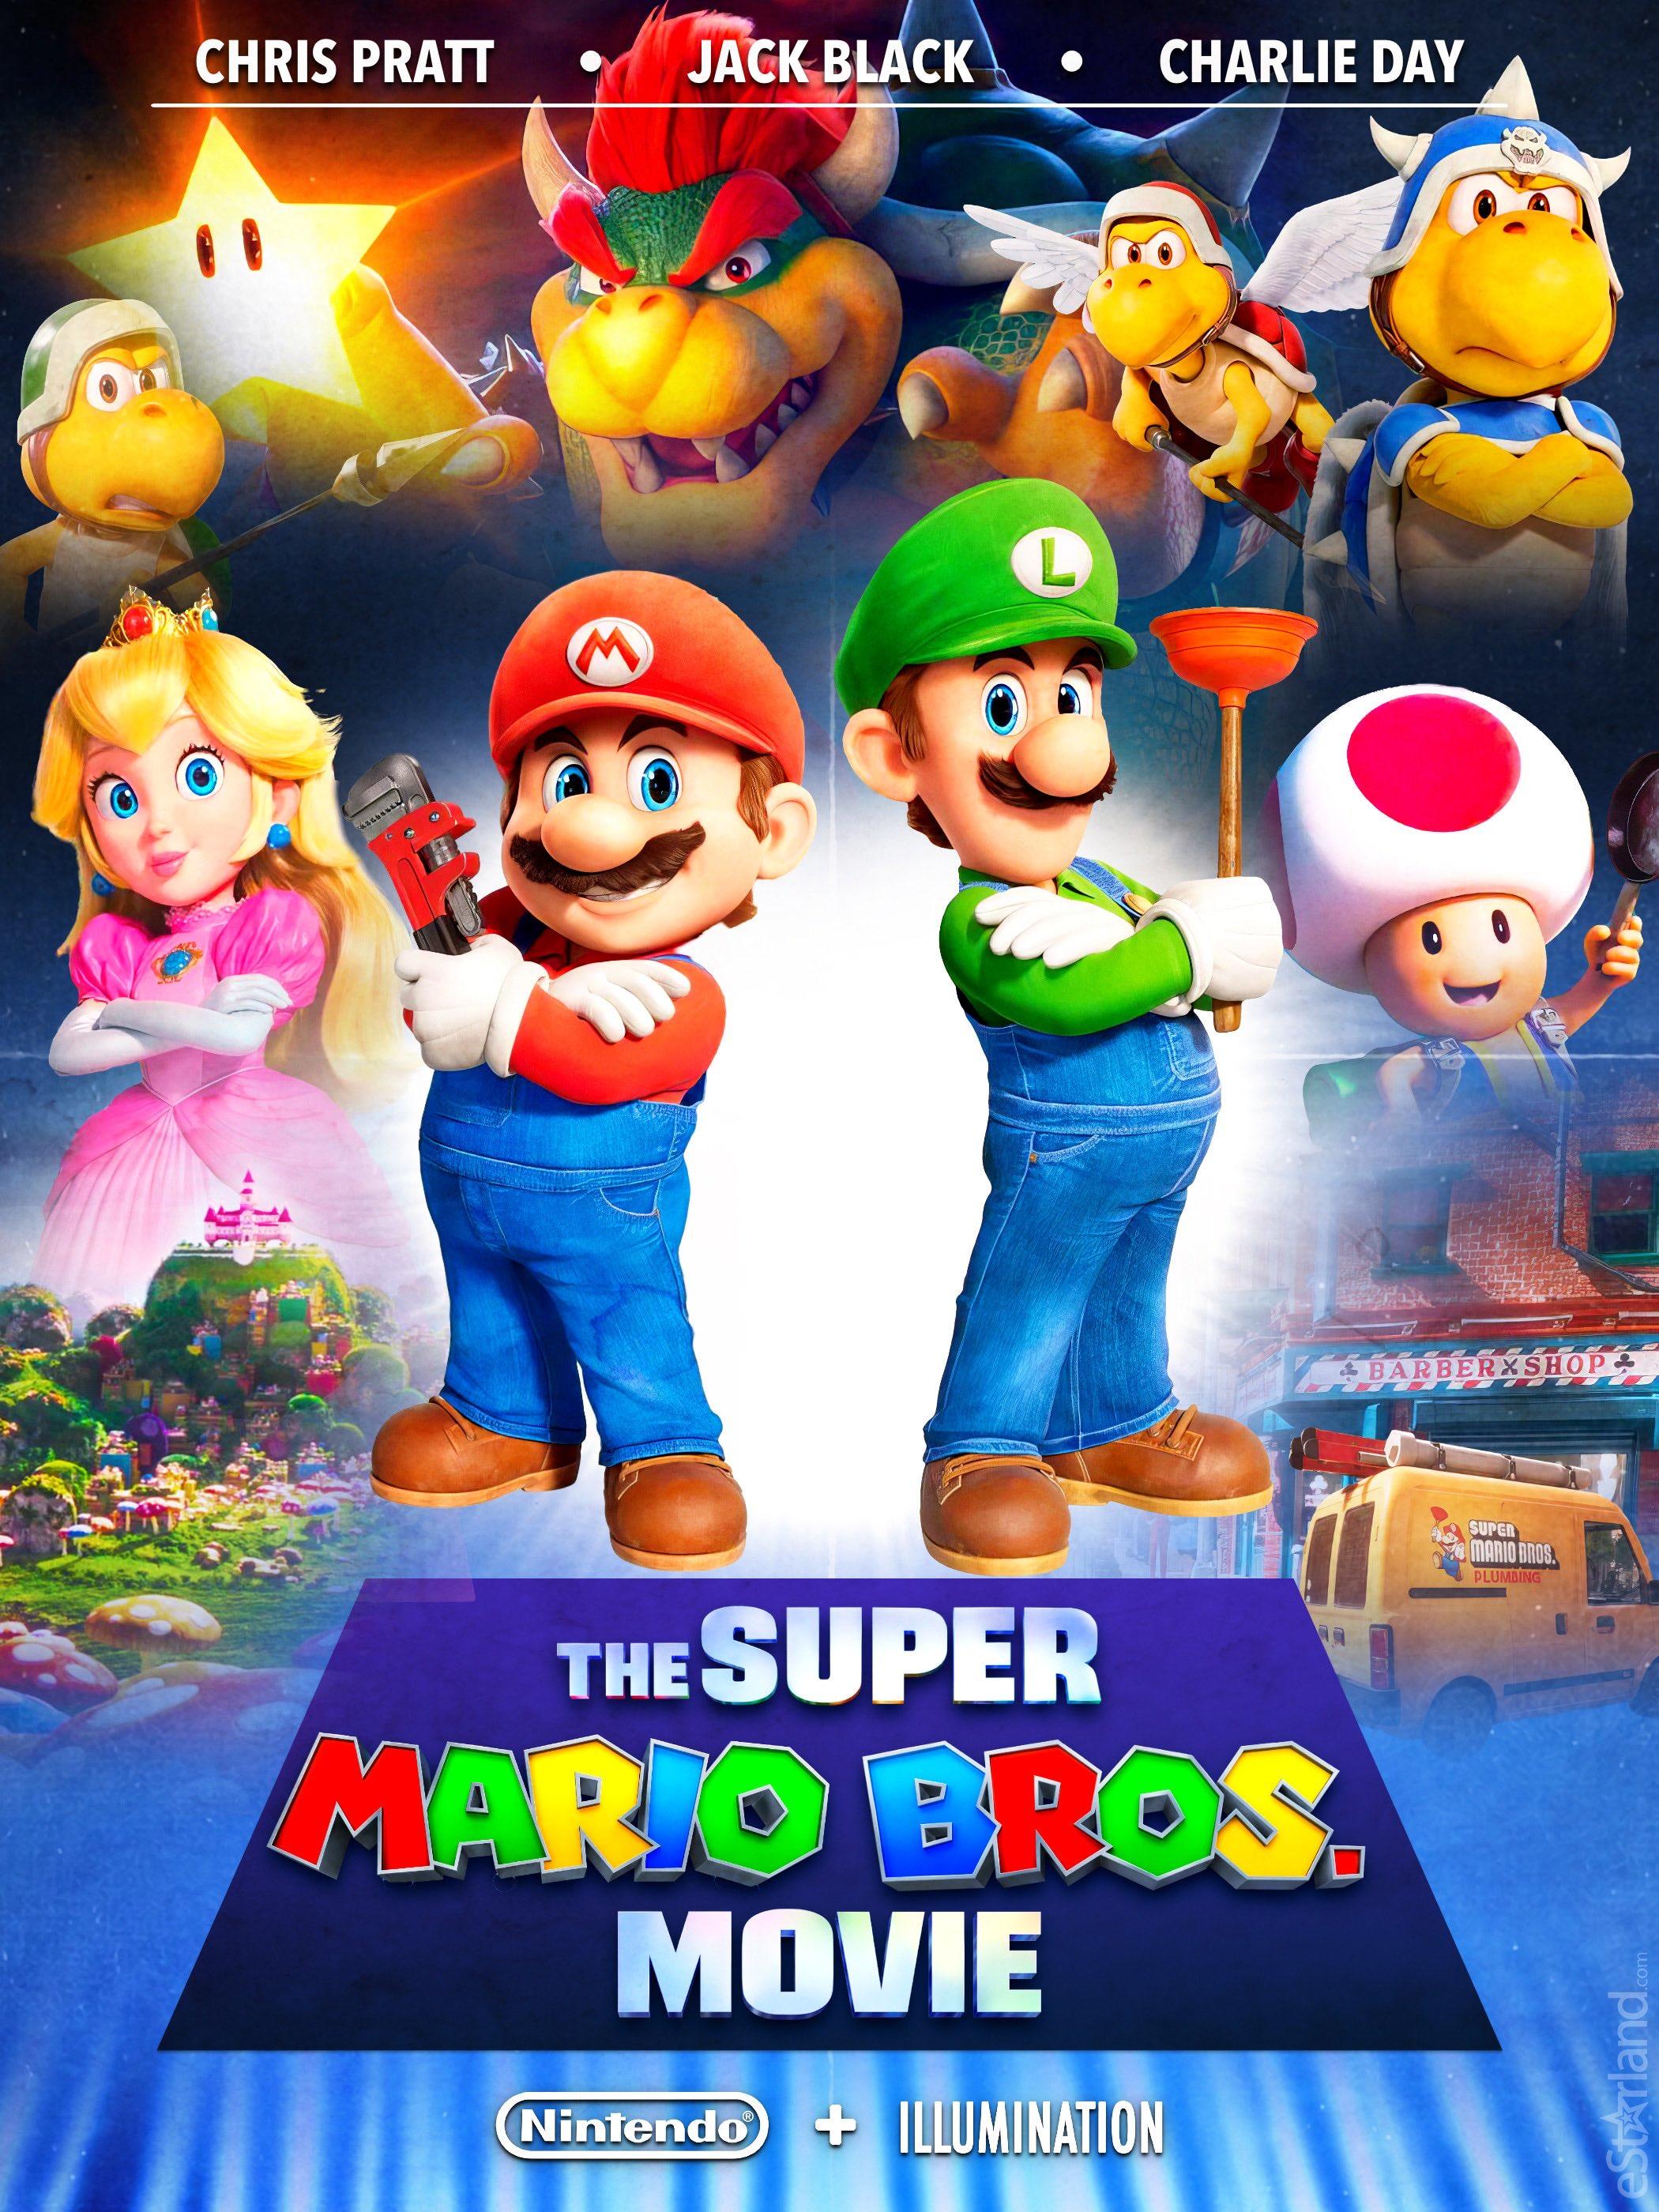 Are You Ready to Get Excited About the Super Mario Bros. Movie?